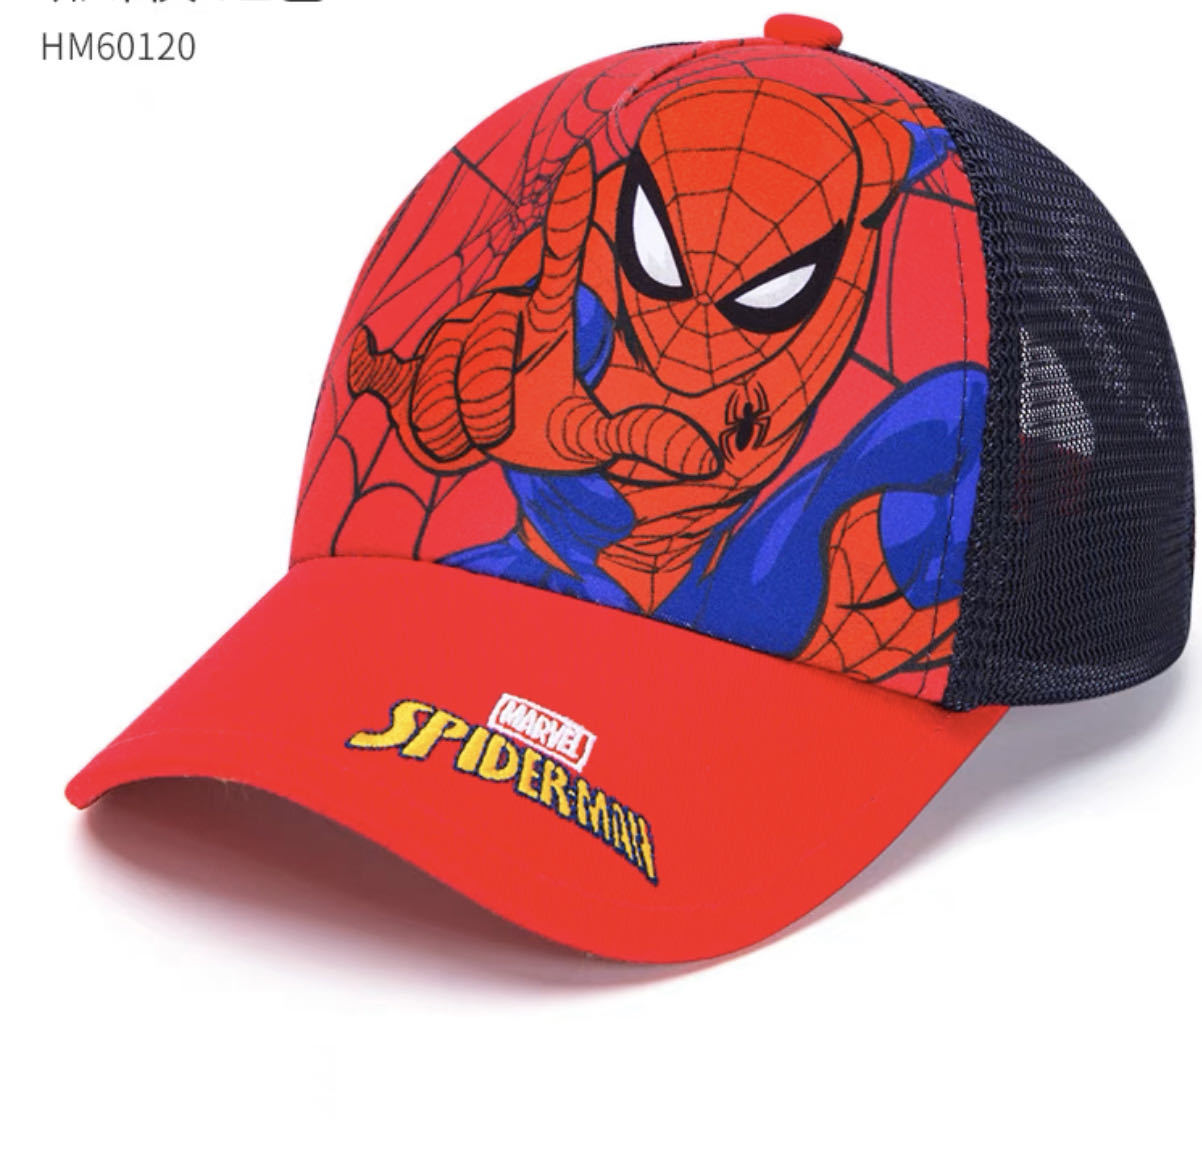 Primary image for Marvel Spiderman cap, adjustable, red, summer cap, brand new